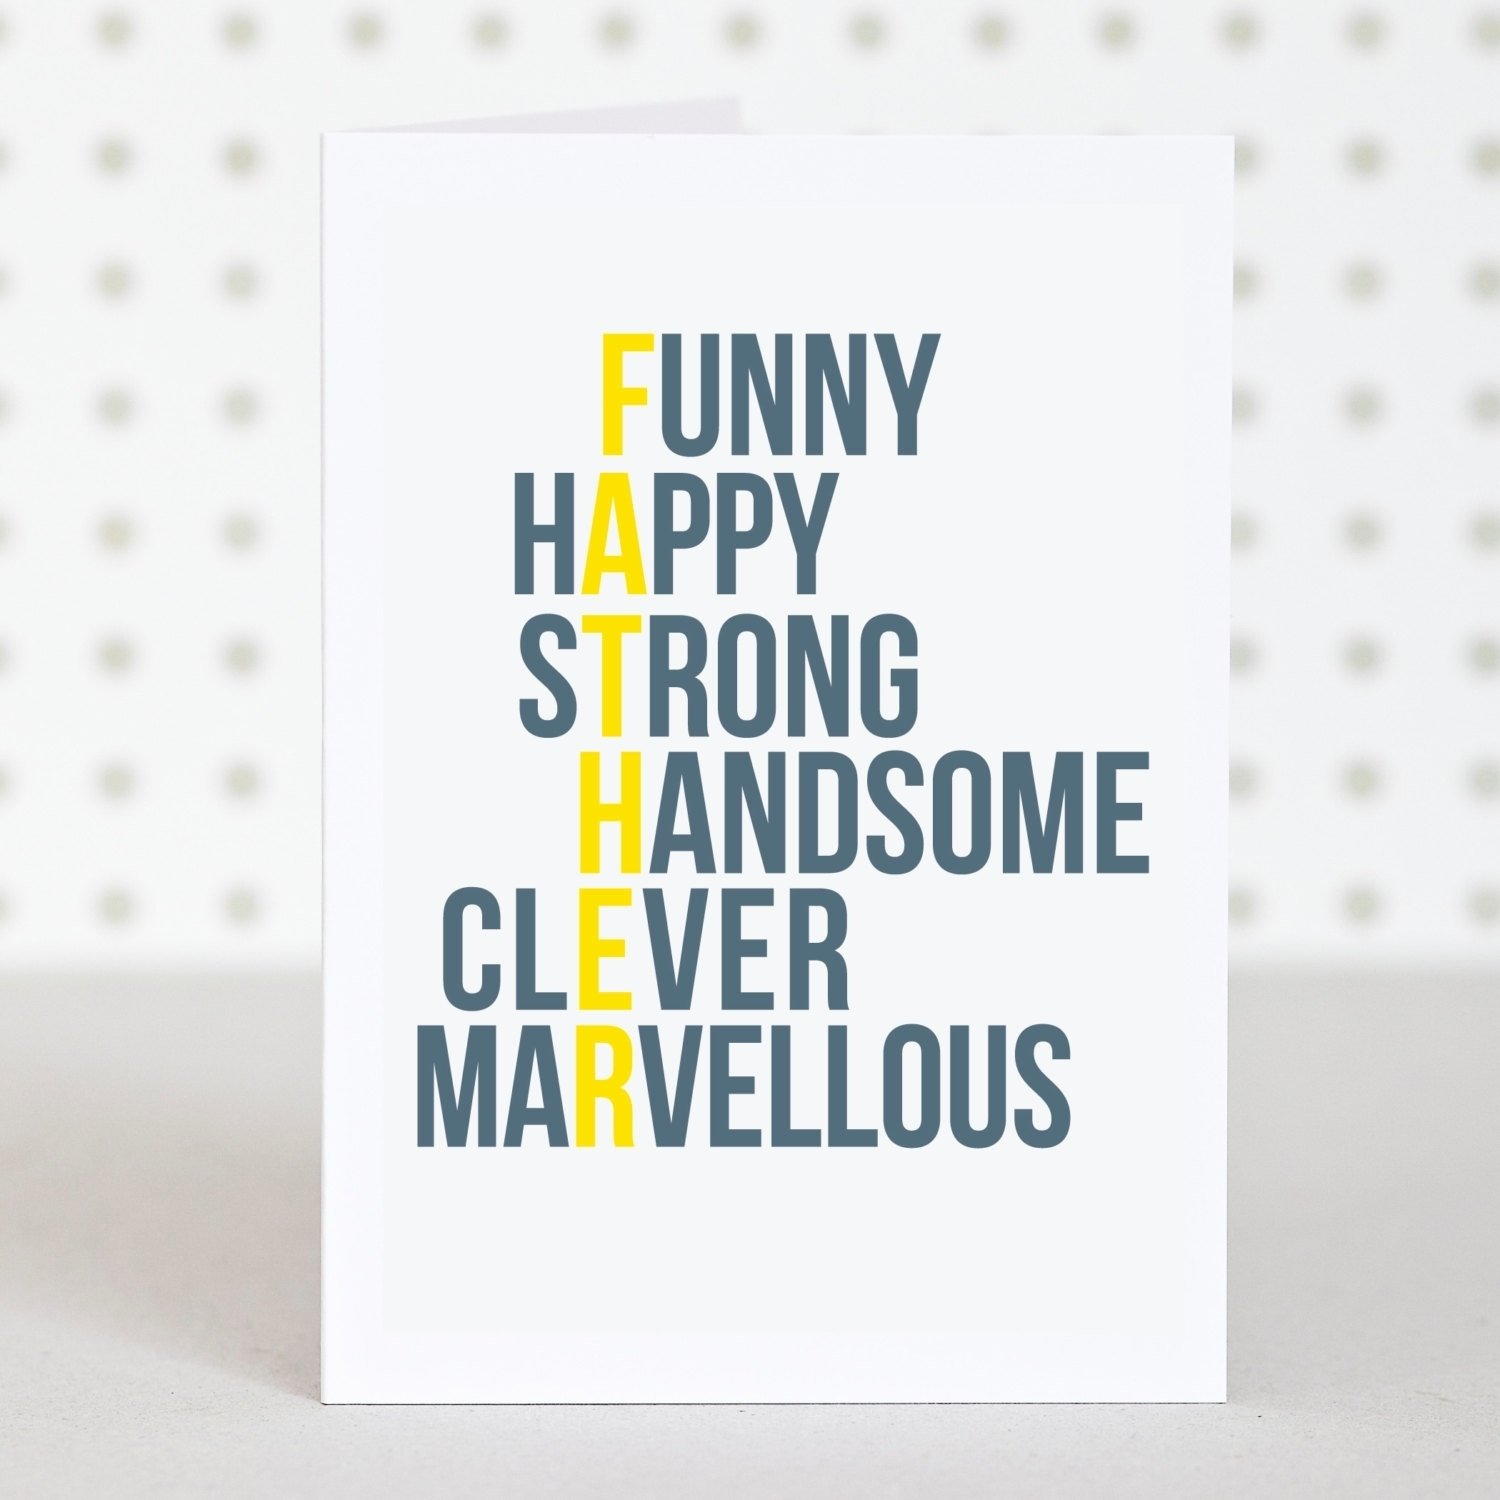 Dad Birthday Card Ideas Funny 90 Birthday Ideas For Dads 50th 50th Birthday Gifts For Dad From